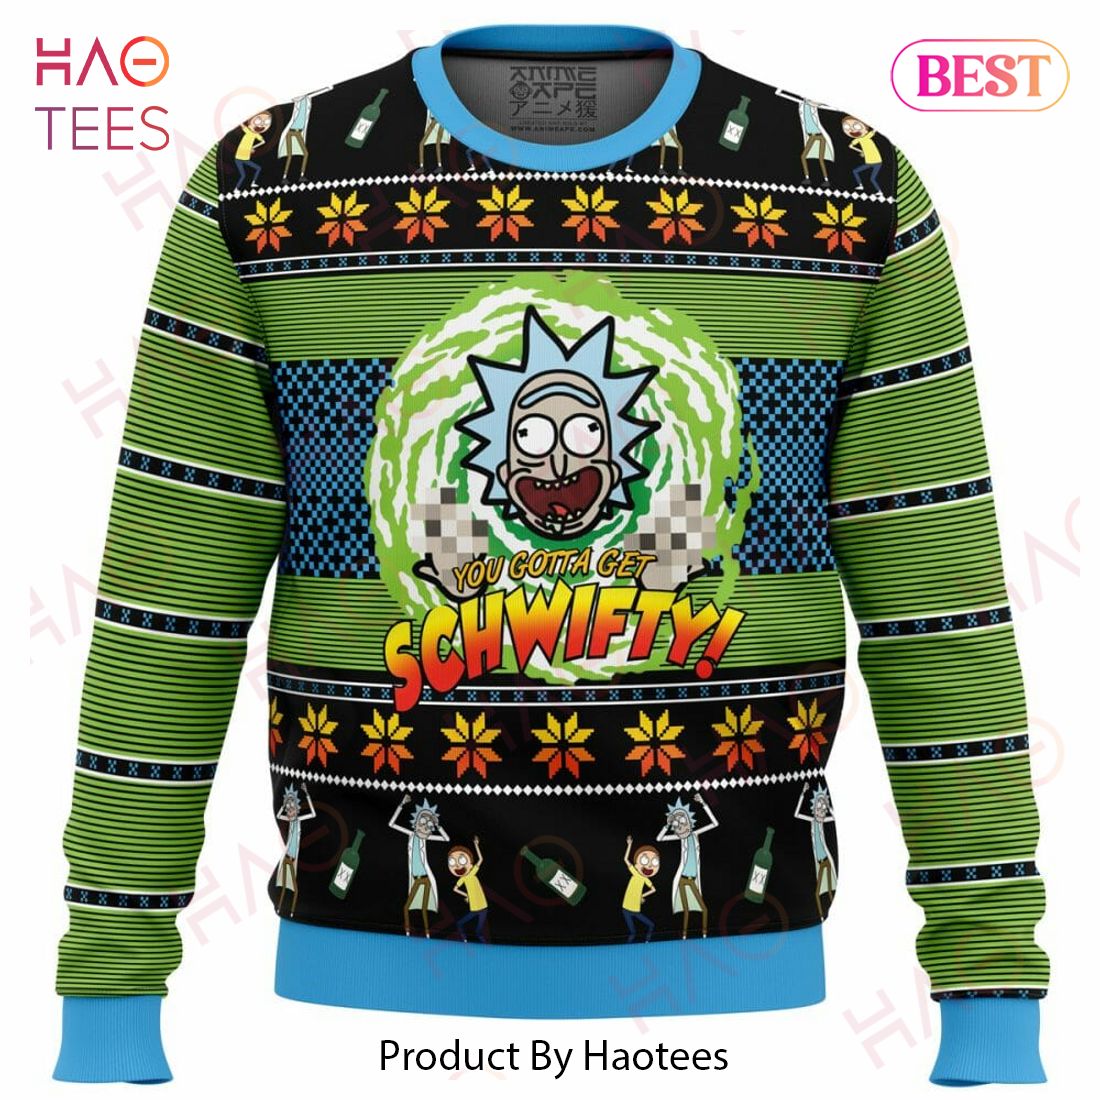 Let's Get Schwifty! Rick And Morty Ugly Christmas Sweater